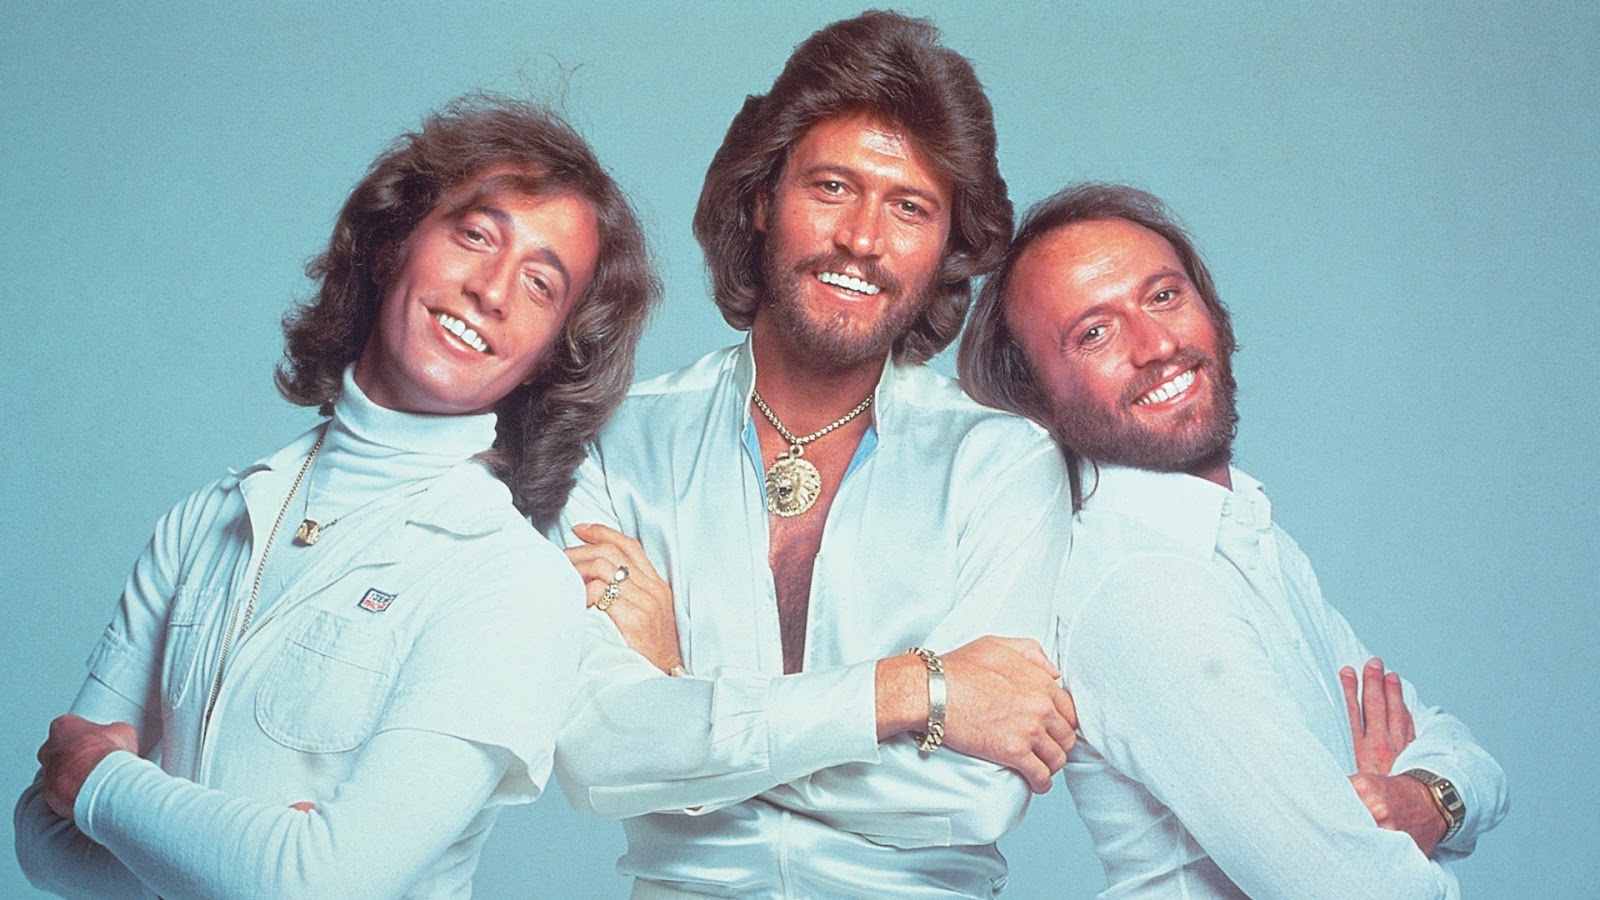 The Bee Gees were a pop music group that was formed in 1958. The group's line-up consisted of brothers Barry, Robin and Maurice Gibb. http://www.jinglejanglejungle.net/2015/01/bgs.html